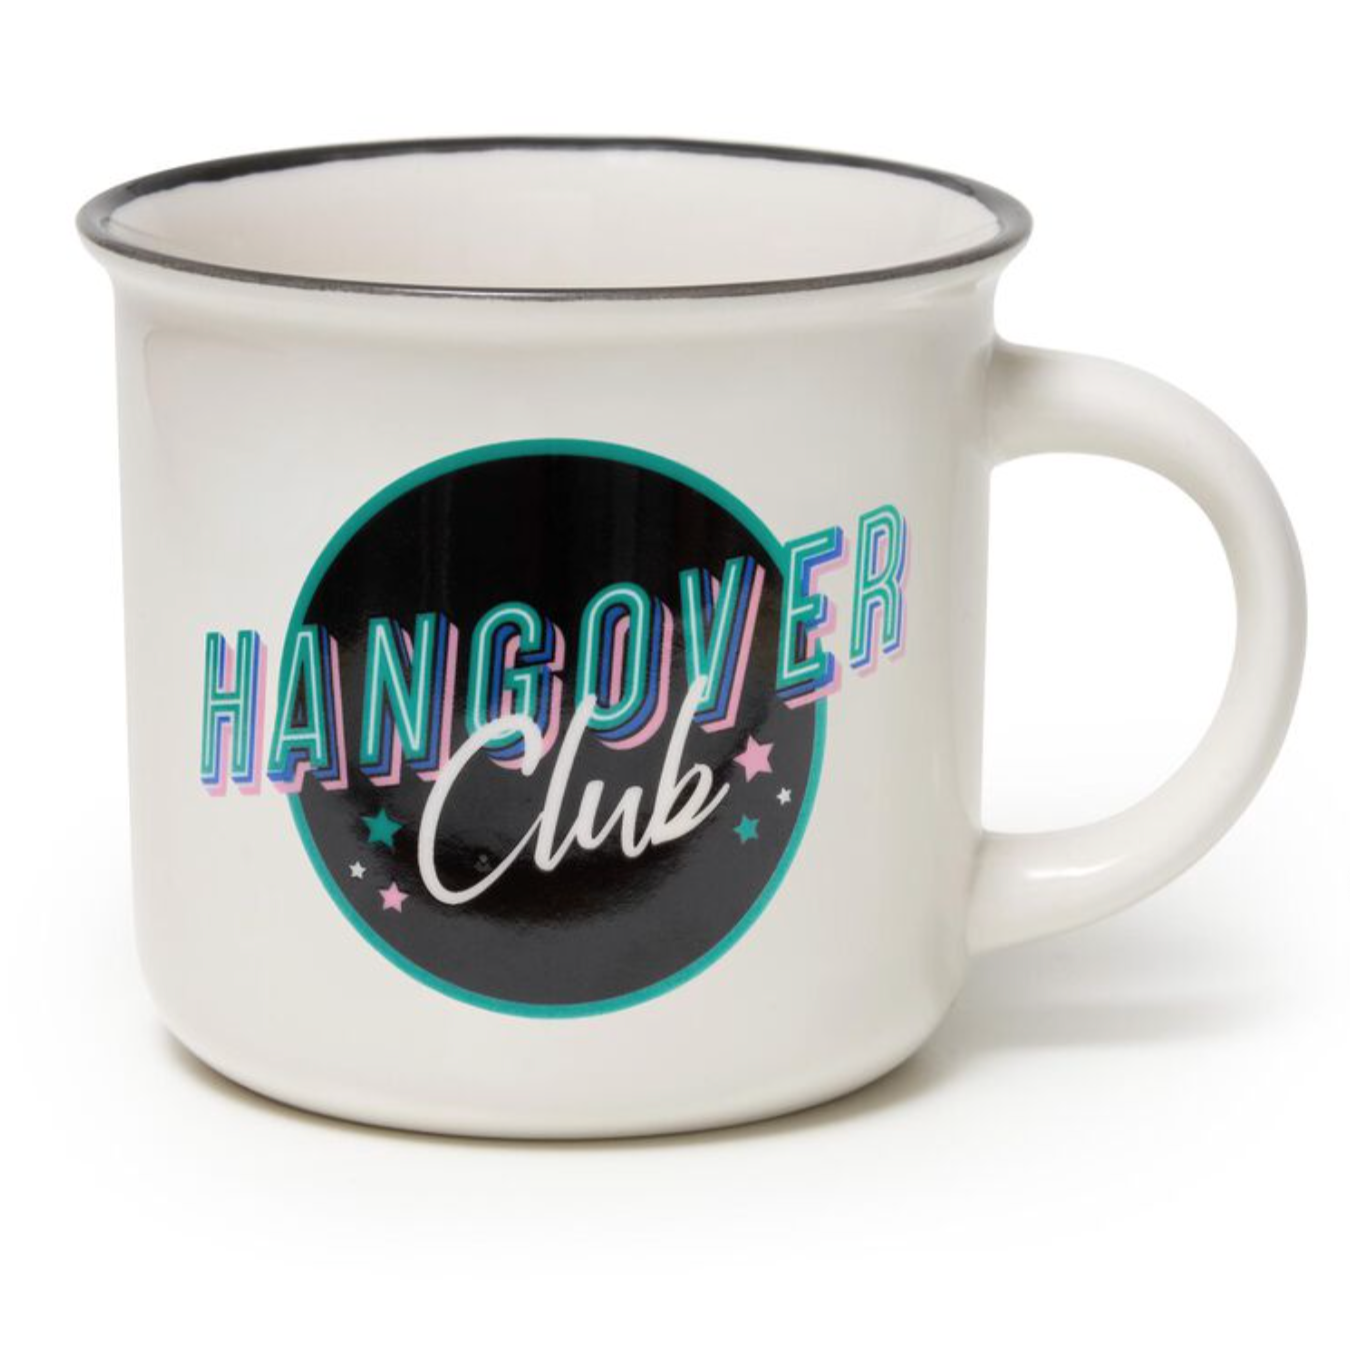 Cup-Puccino - Hangover Club